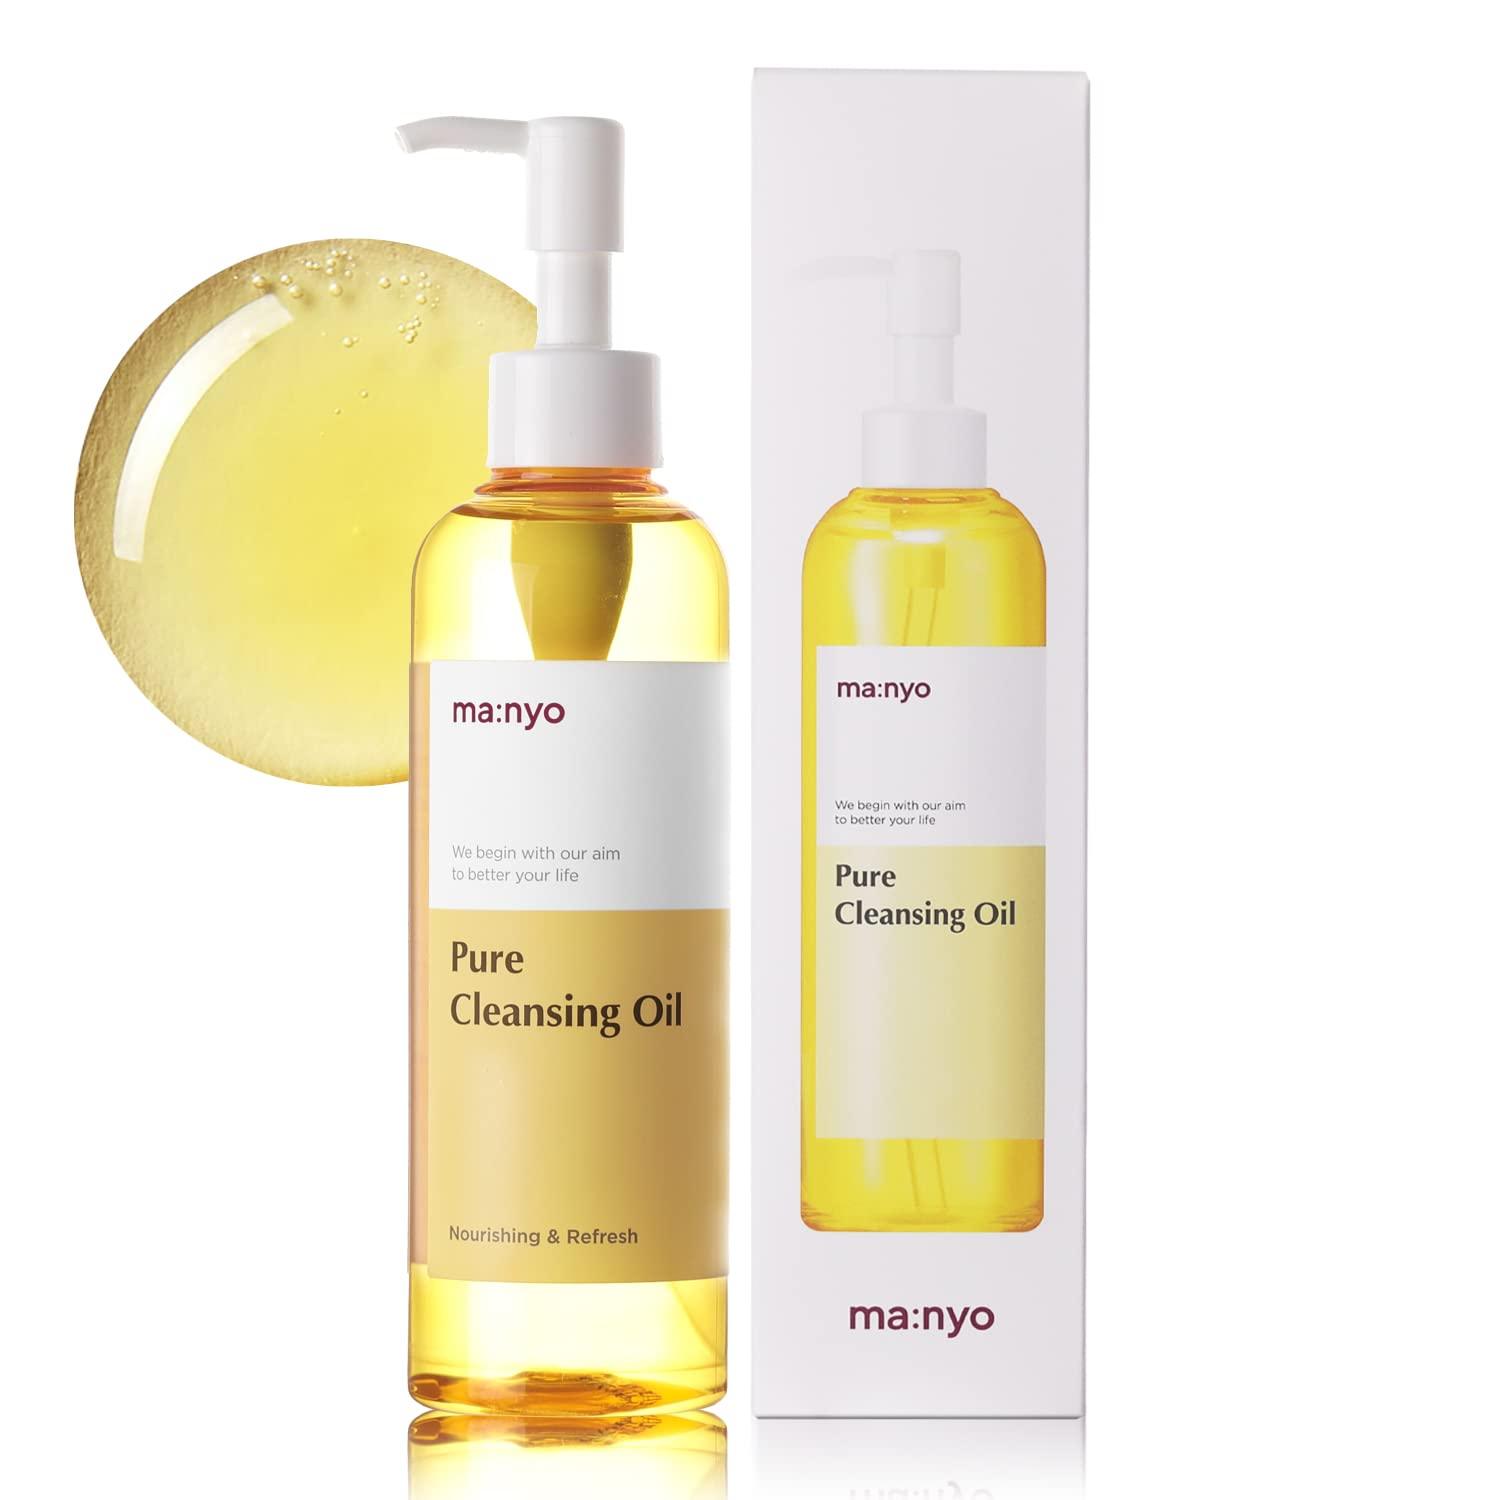 MANYO Pure Cleansing Oil from MANYO